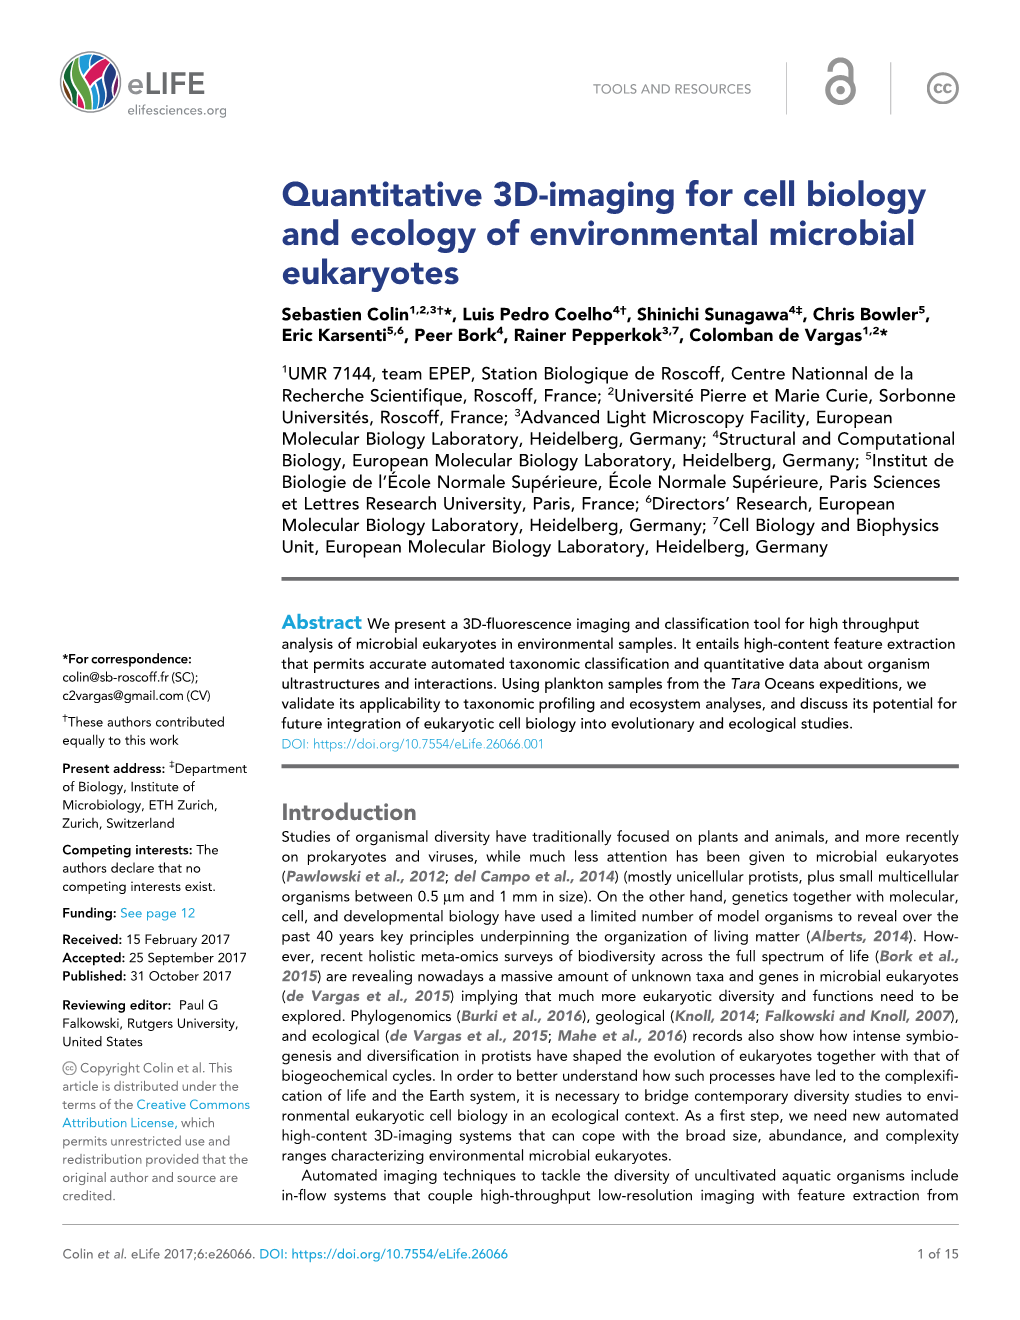 Quantitative 3D-Imaging for Cell Biology and Ecology Of